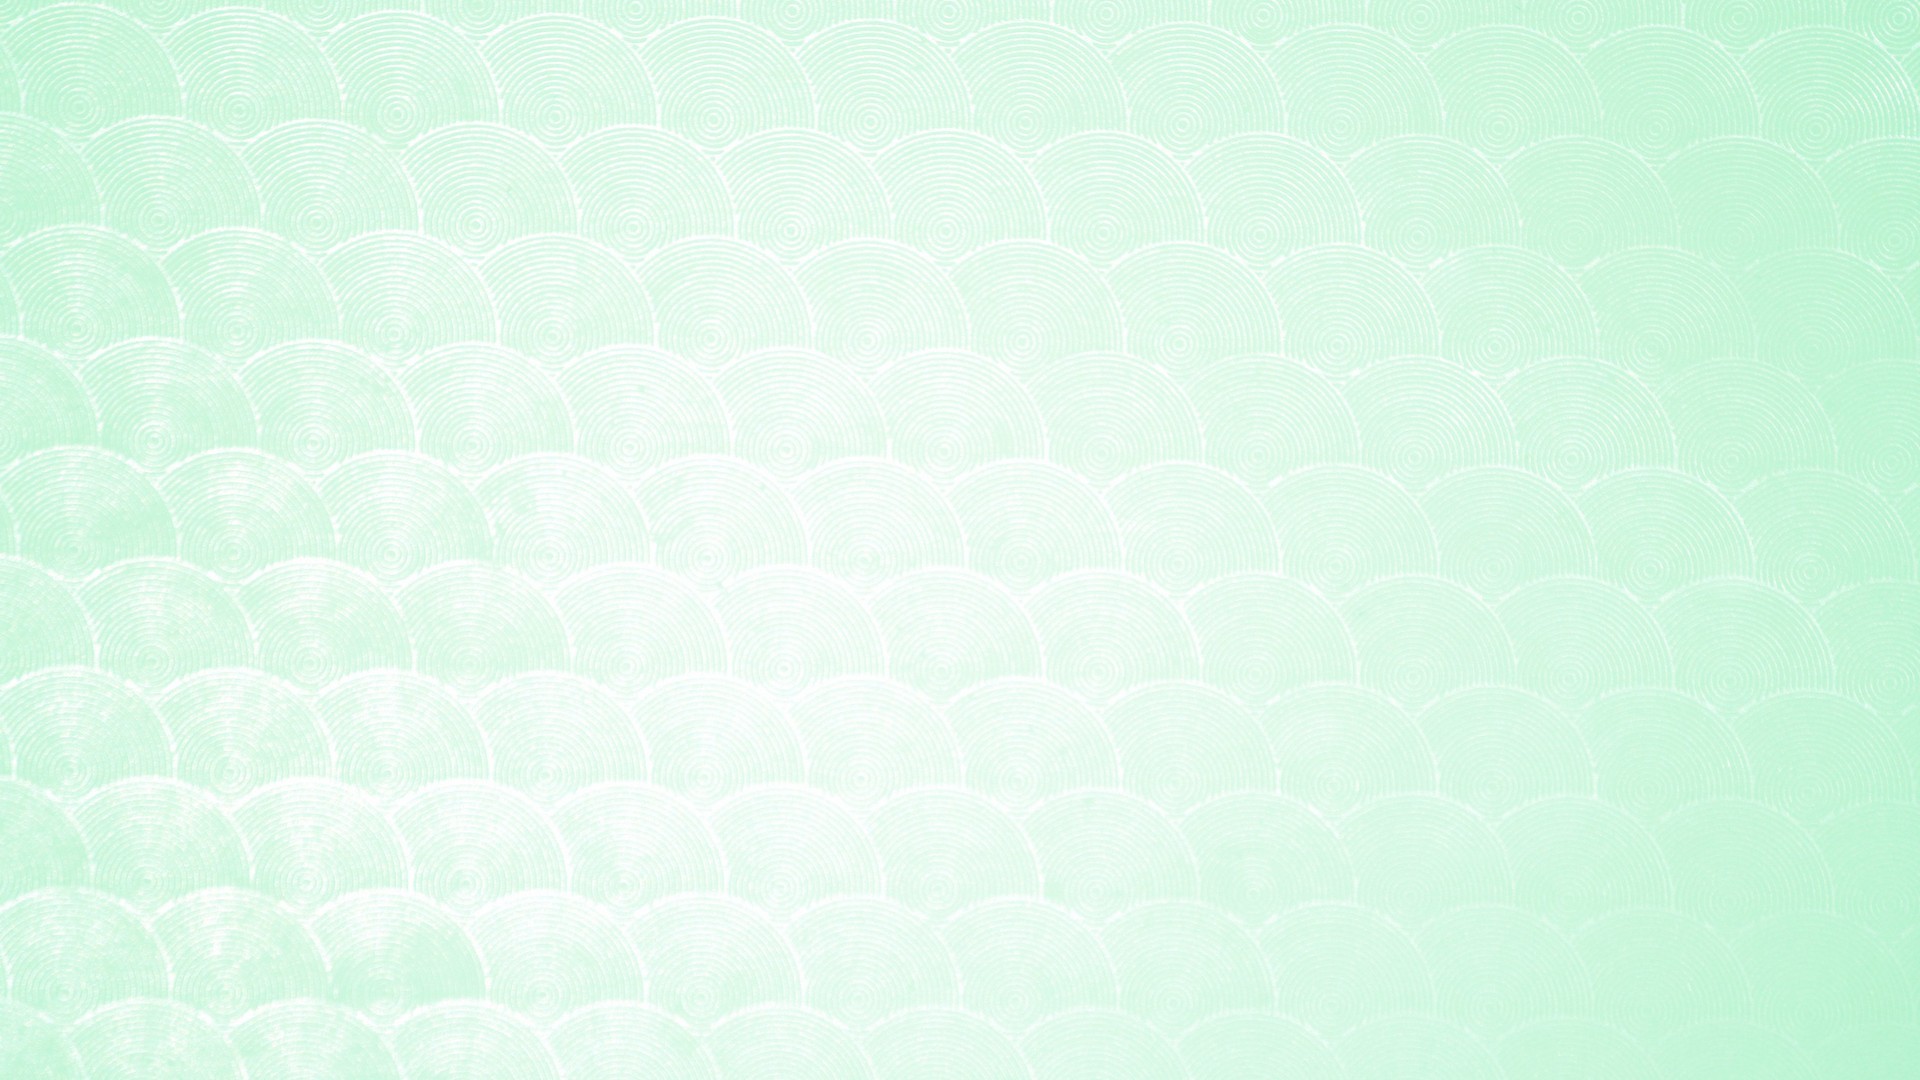 Desktop Wallpaper Mint Green with resolution 1920X1080 pixel. You can use this wallpaper as background for your desktop Computer Screensavers, Android or iPhone smartphones